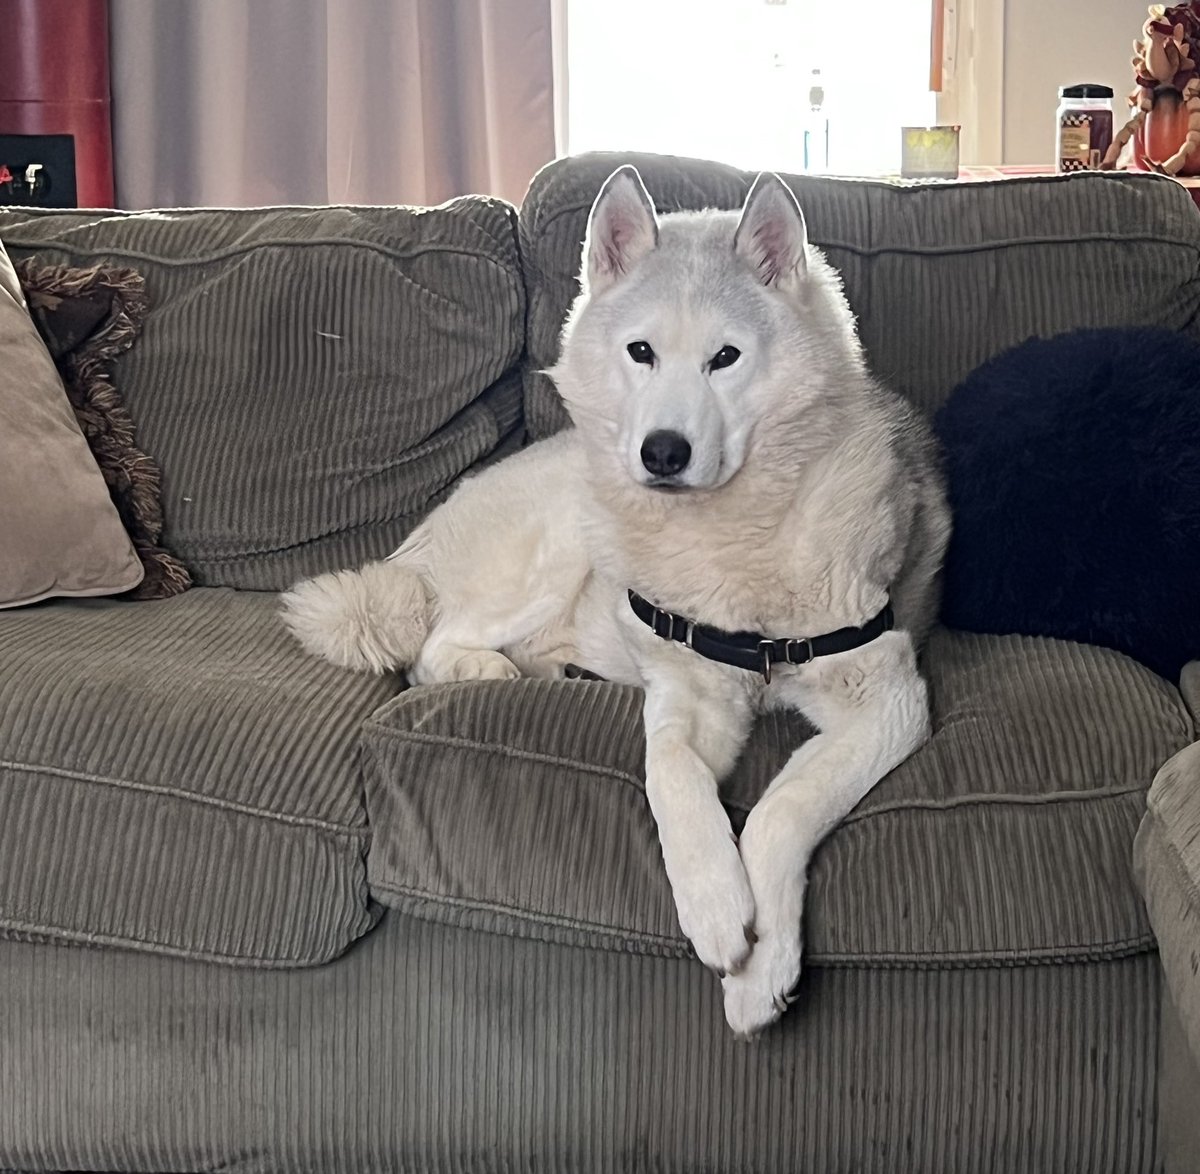 What a diva #huskyinthehouse #couchdogs